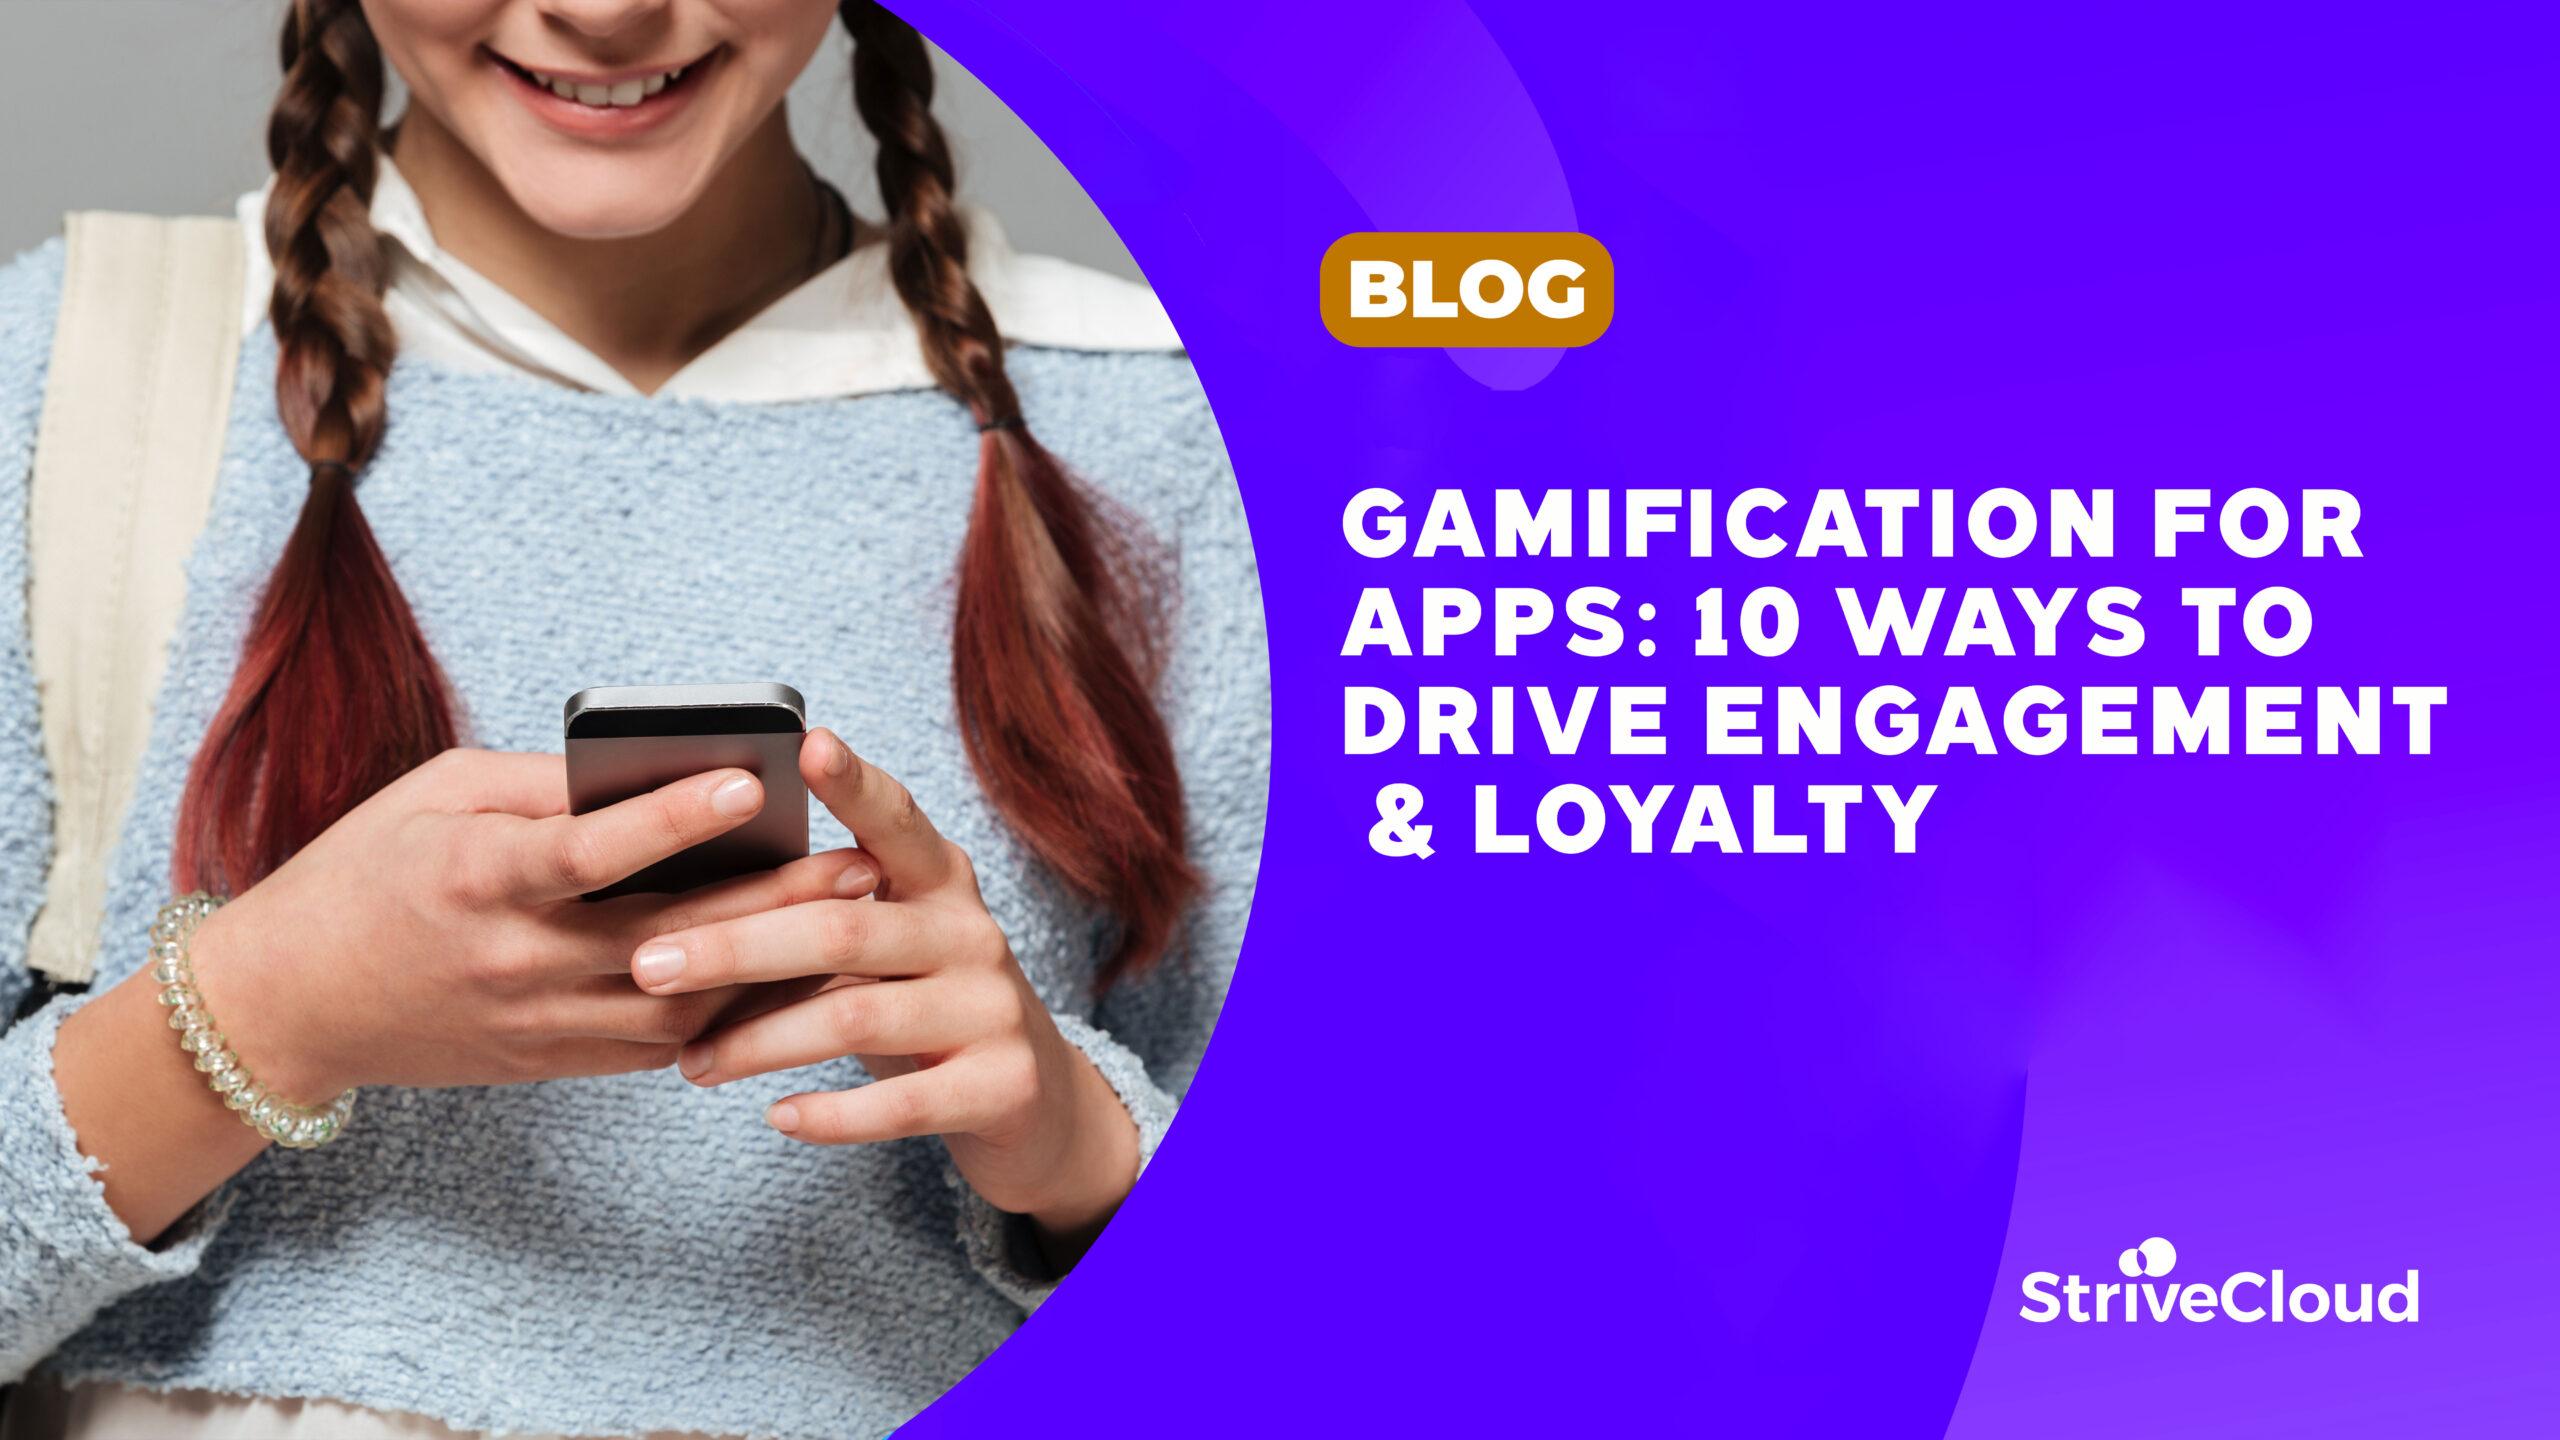 schoolgirl hands holding phone, blog post title about engagement and loyalty